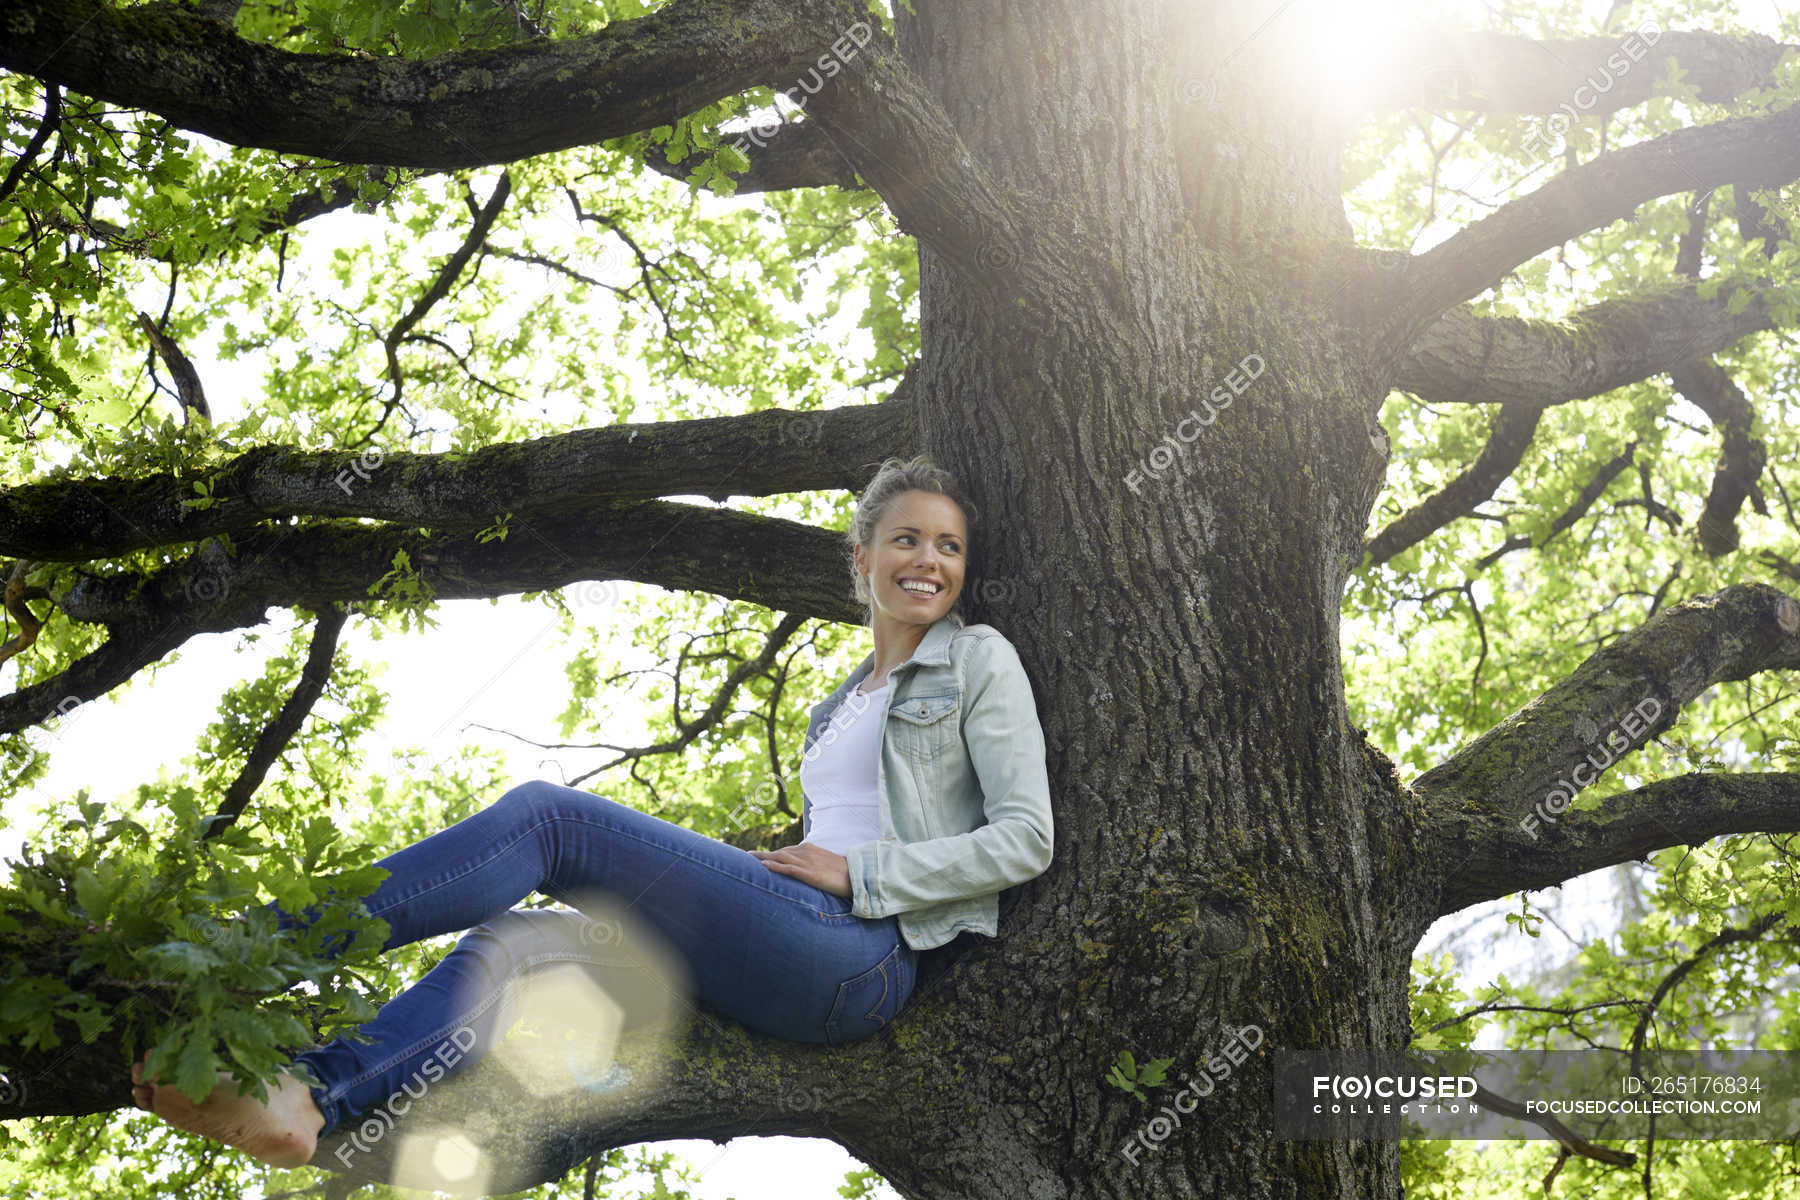 https://st.focusedcollection.com/14026668/i/1800/focused_265176834-stock-photo-smiling-woman-sitting-branch-relaxing.jpg